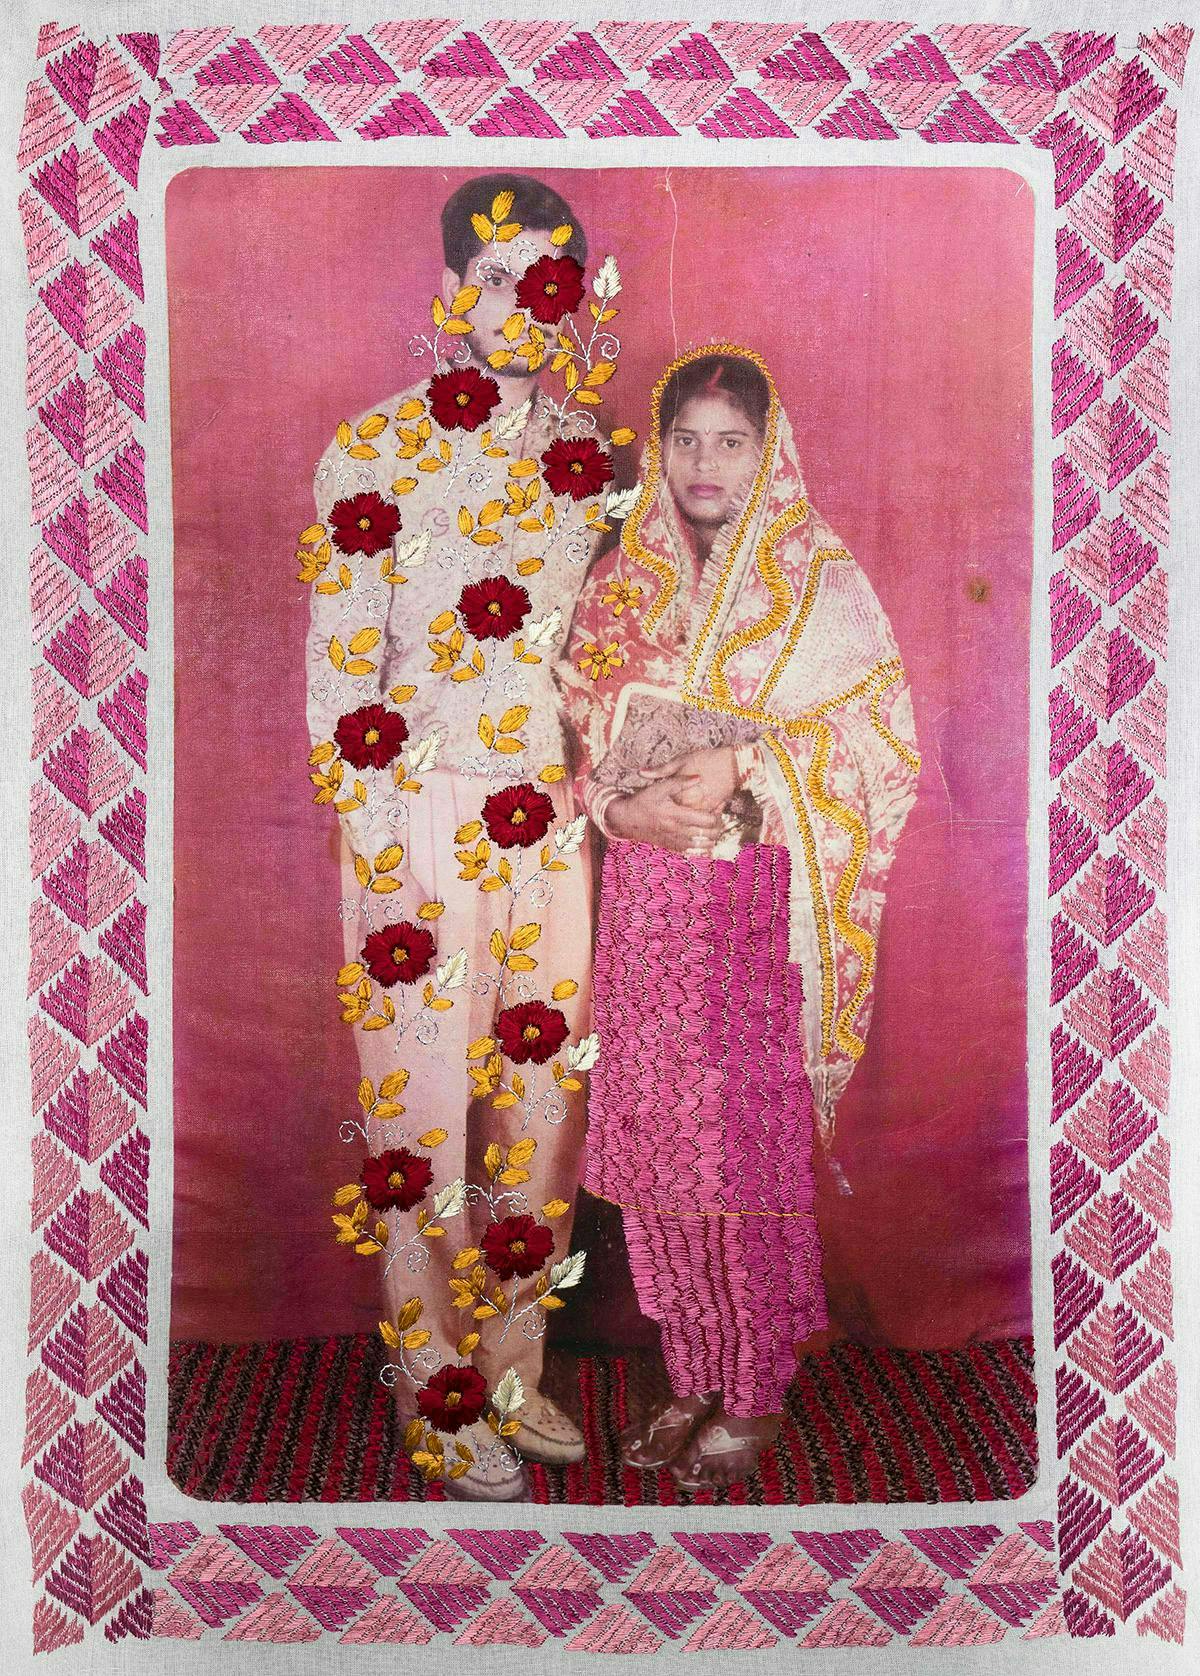 Photograph printed on fabric and embroidered